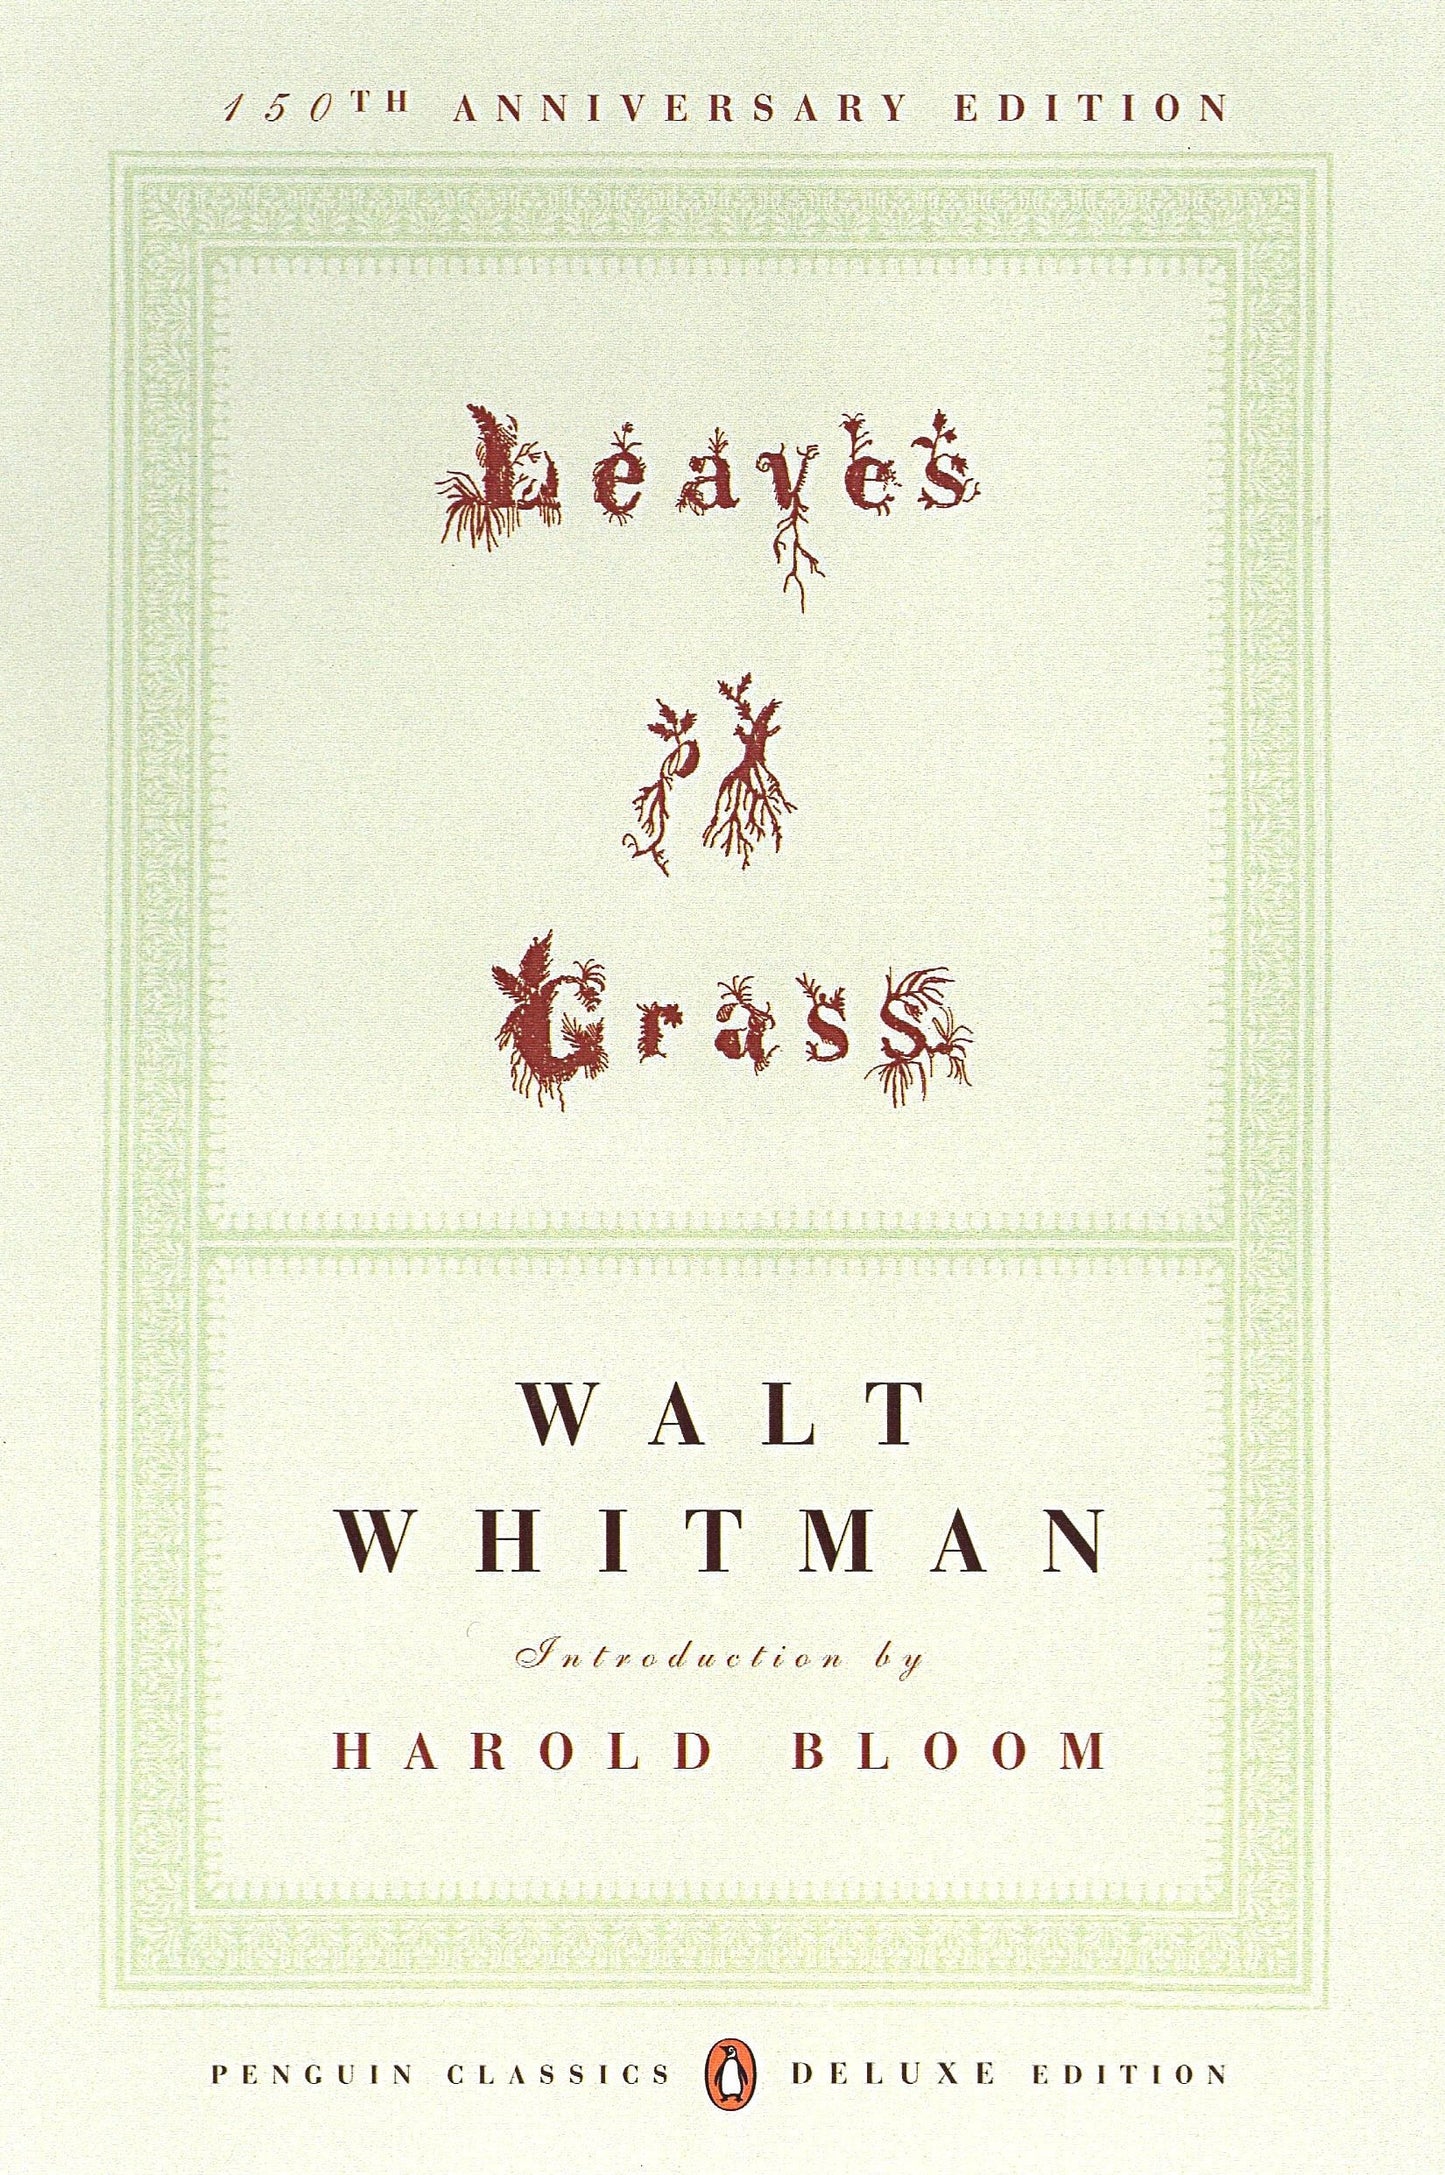 Leaves of Grass: The 1855 Anniversary Edition, by Walt Whitman